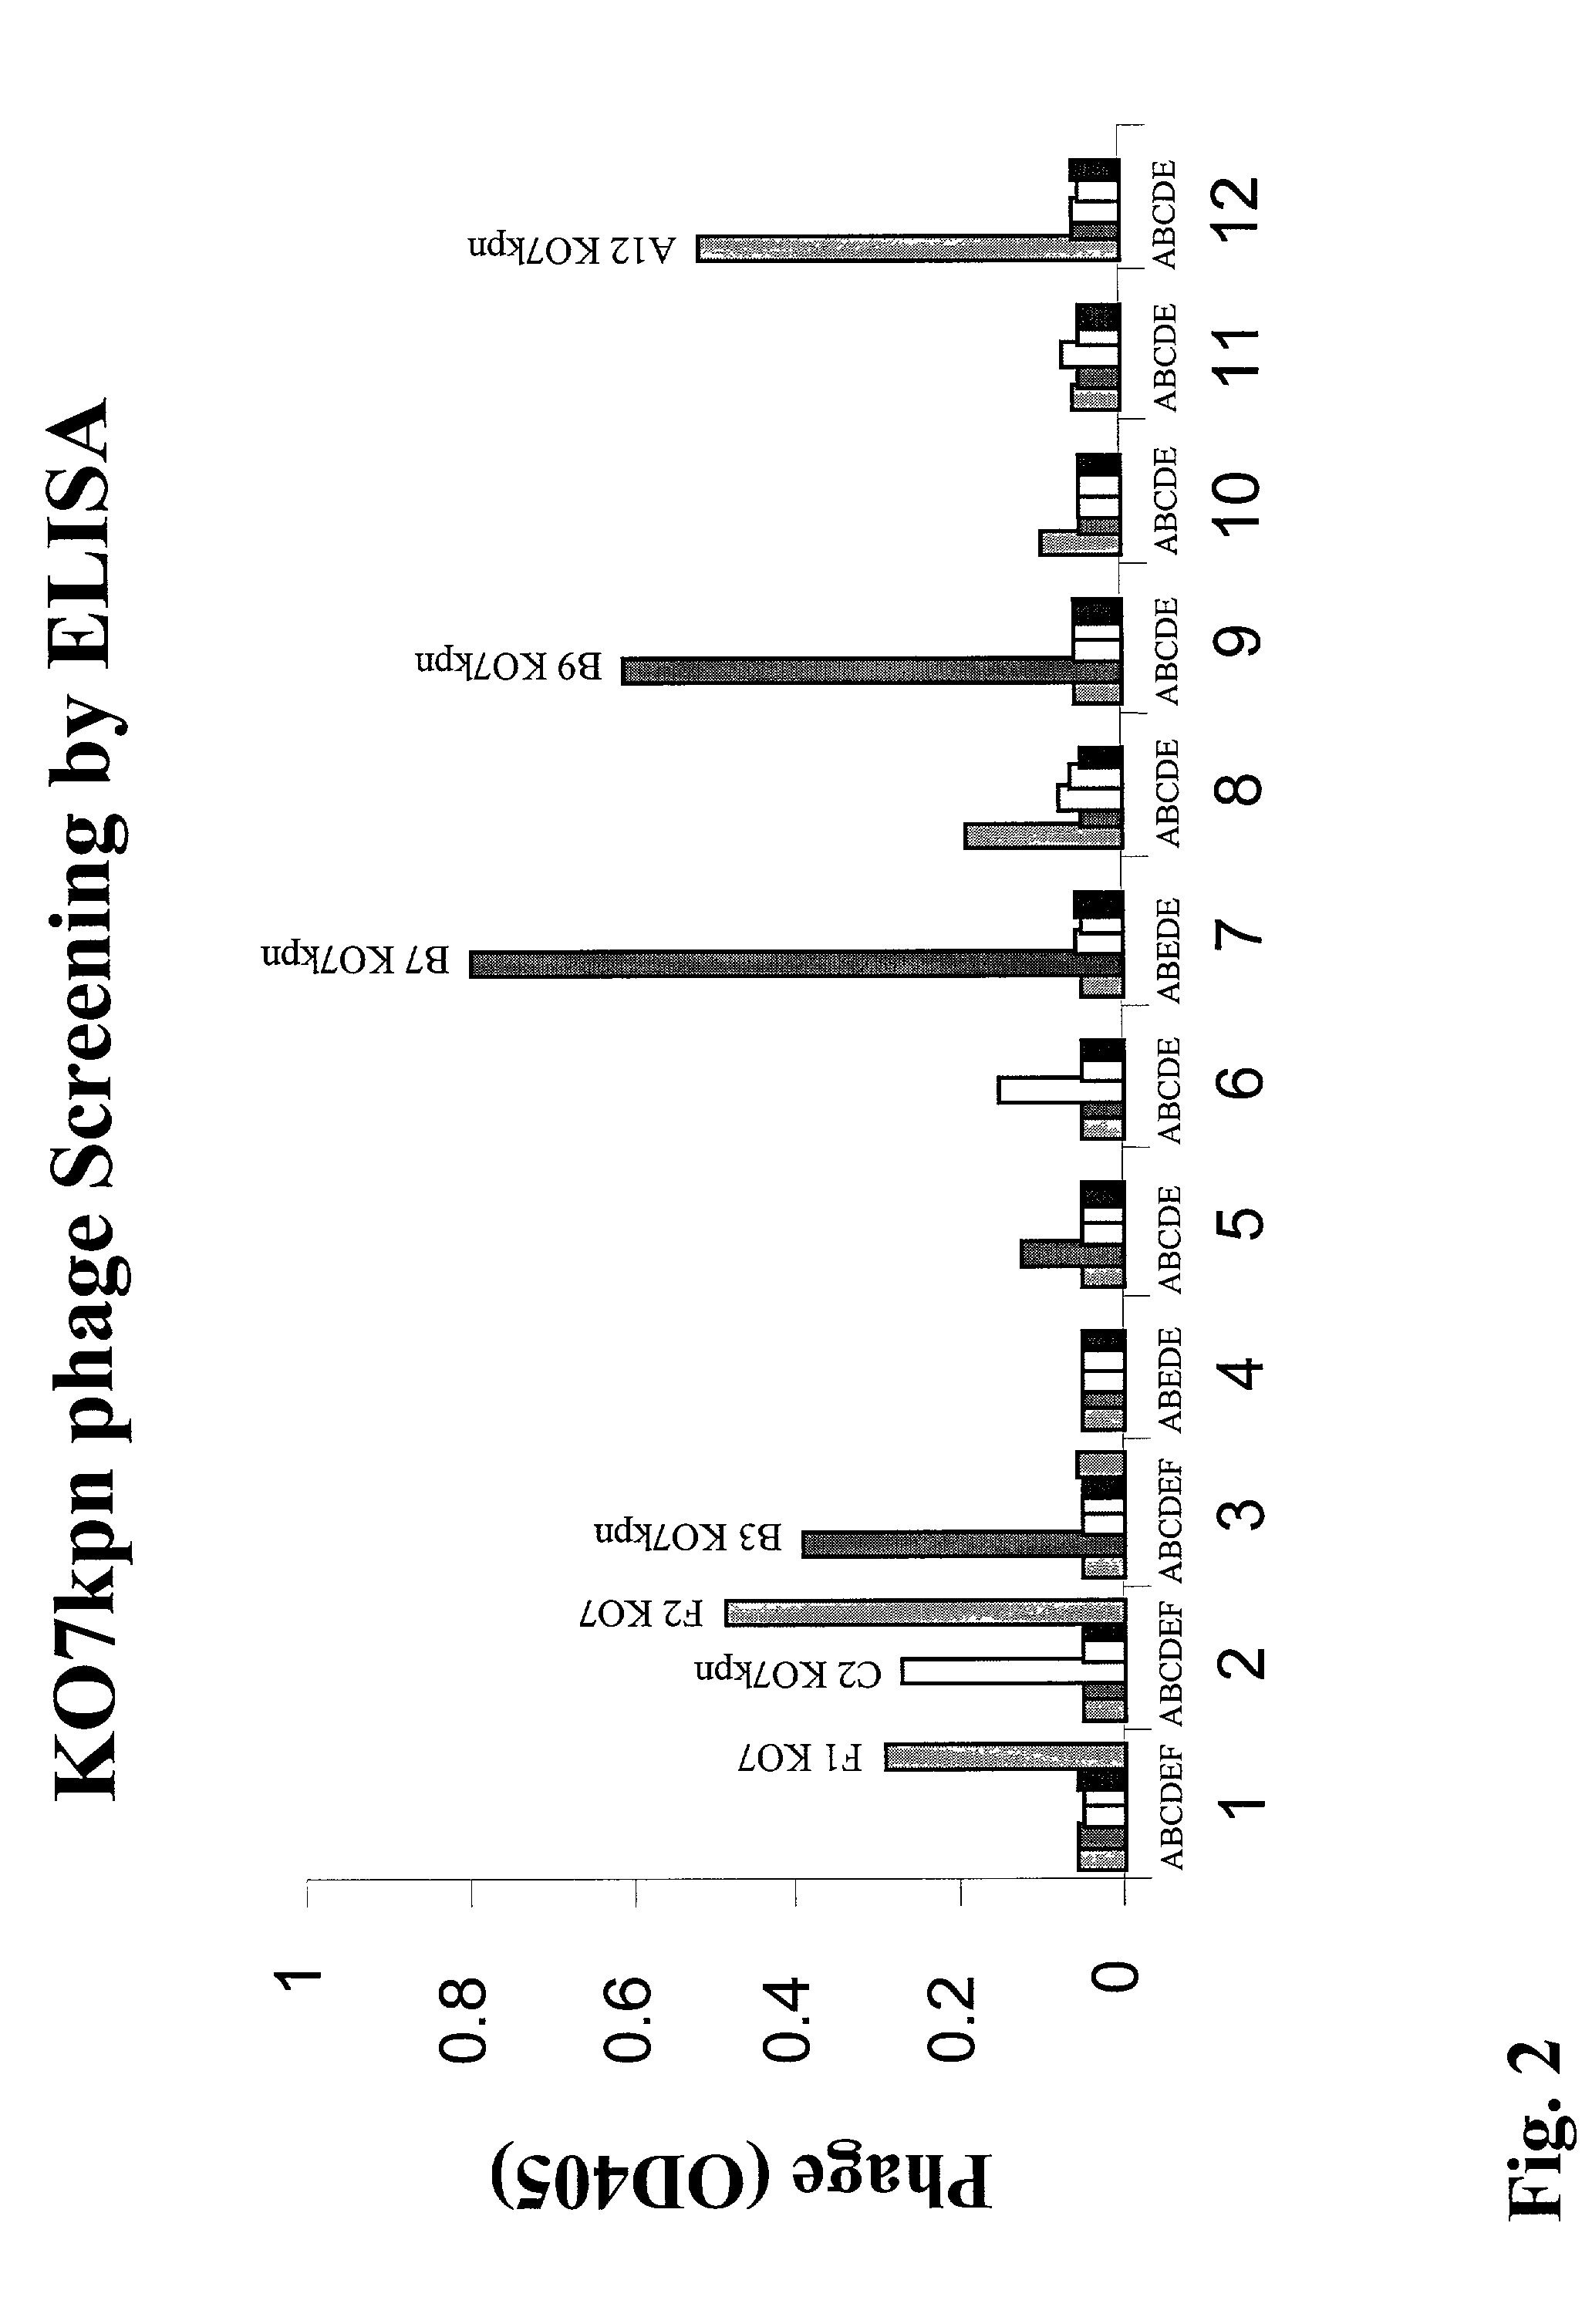 Adapter-directed display systems